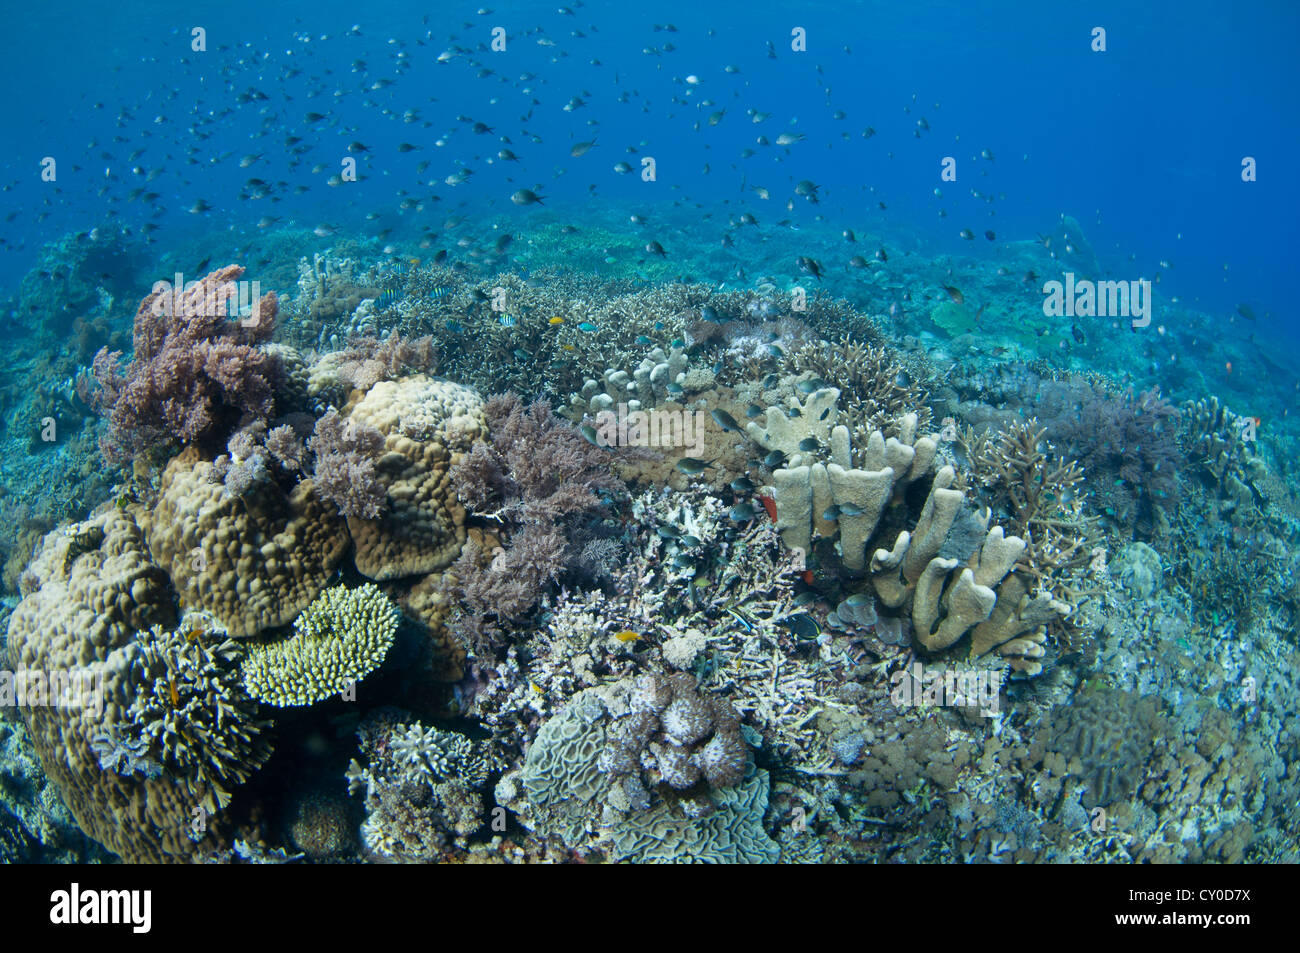 Hard coral garden featuring hard coral including finger and plate corals such as Porites sp., and Acropora Stock Photo